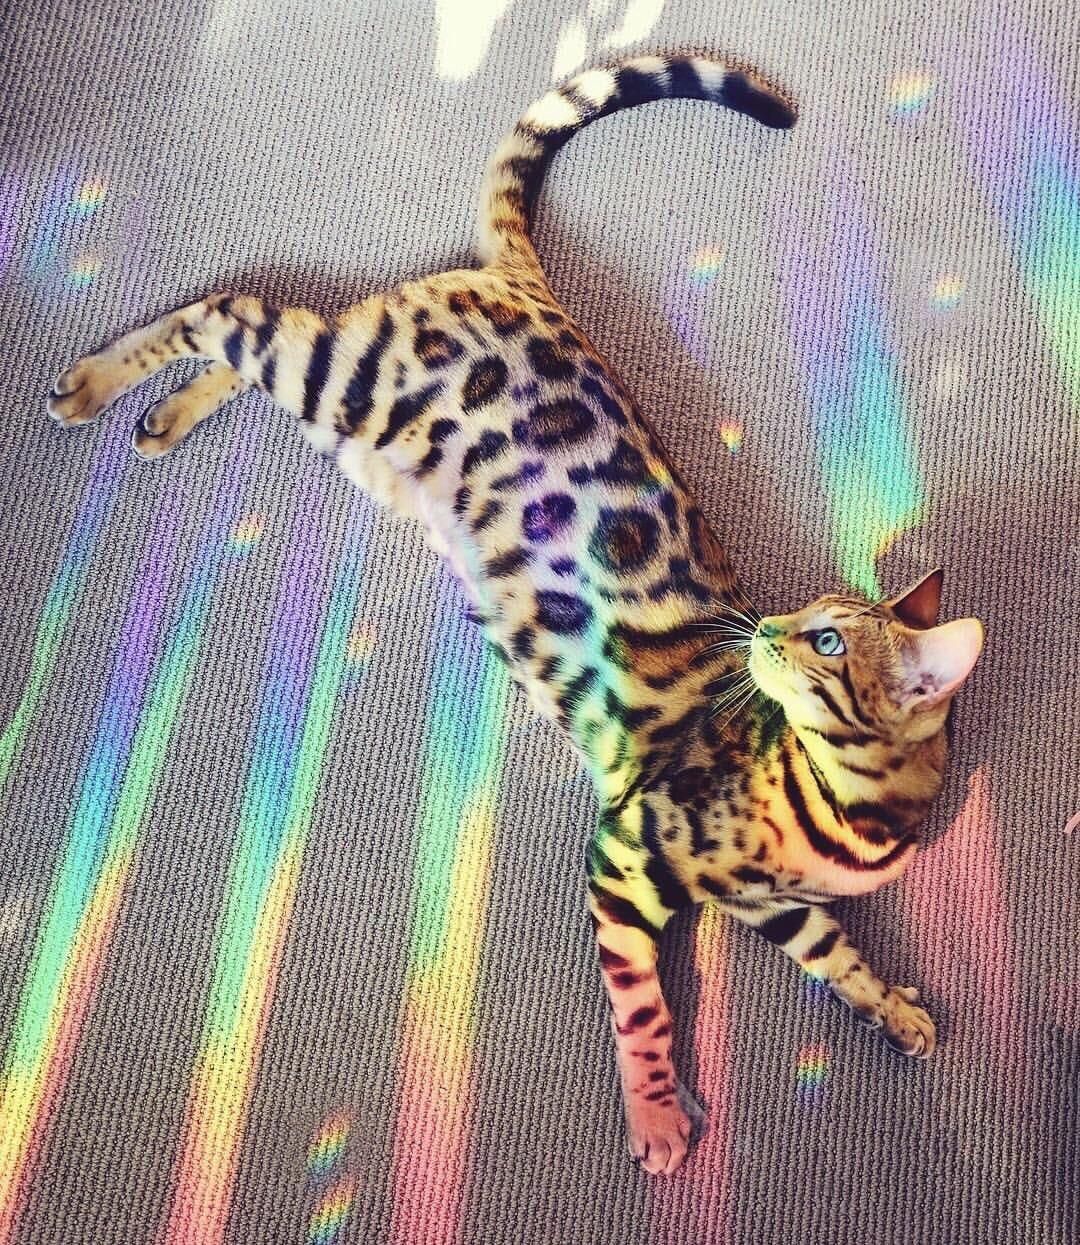 Behind the scenes photo of the 'Nyan Cat' taking a break.